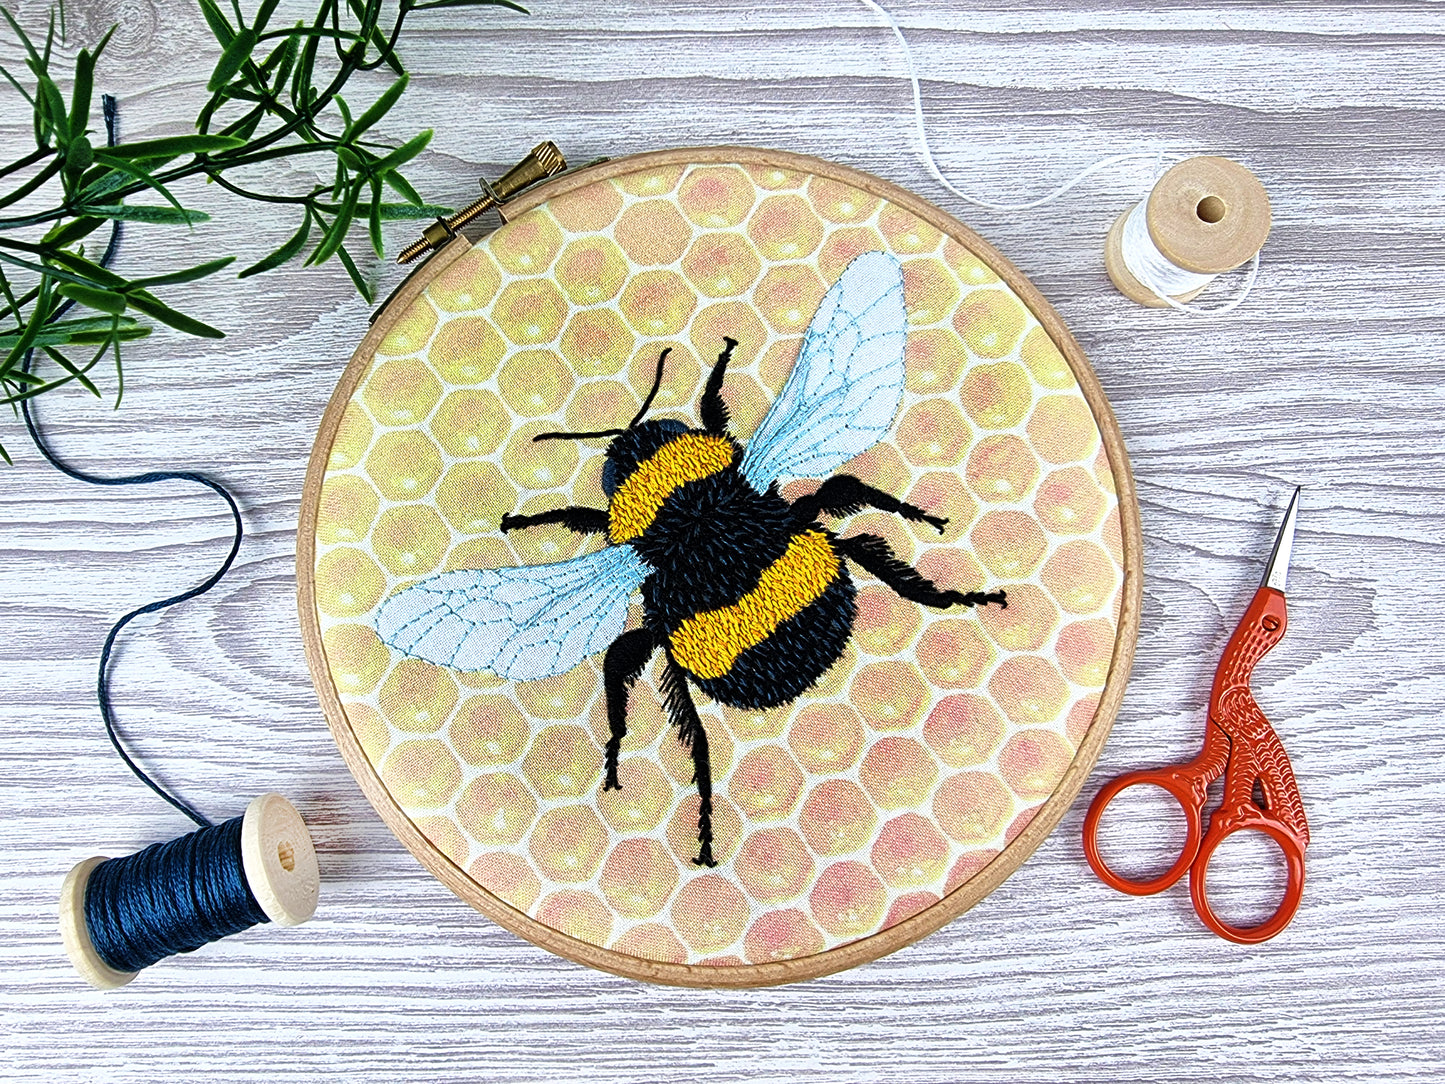 Thread Painted Bumble Bee - Embroidery Fabric Pattern Pack - Fabric Packs - ohsewbootiful